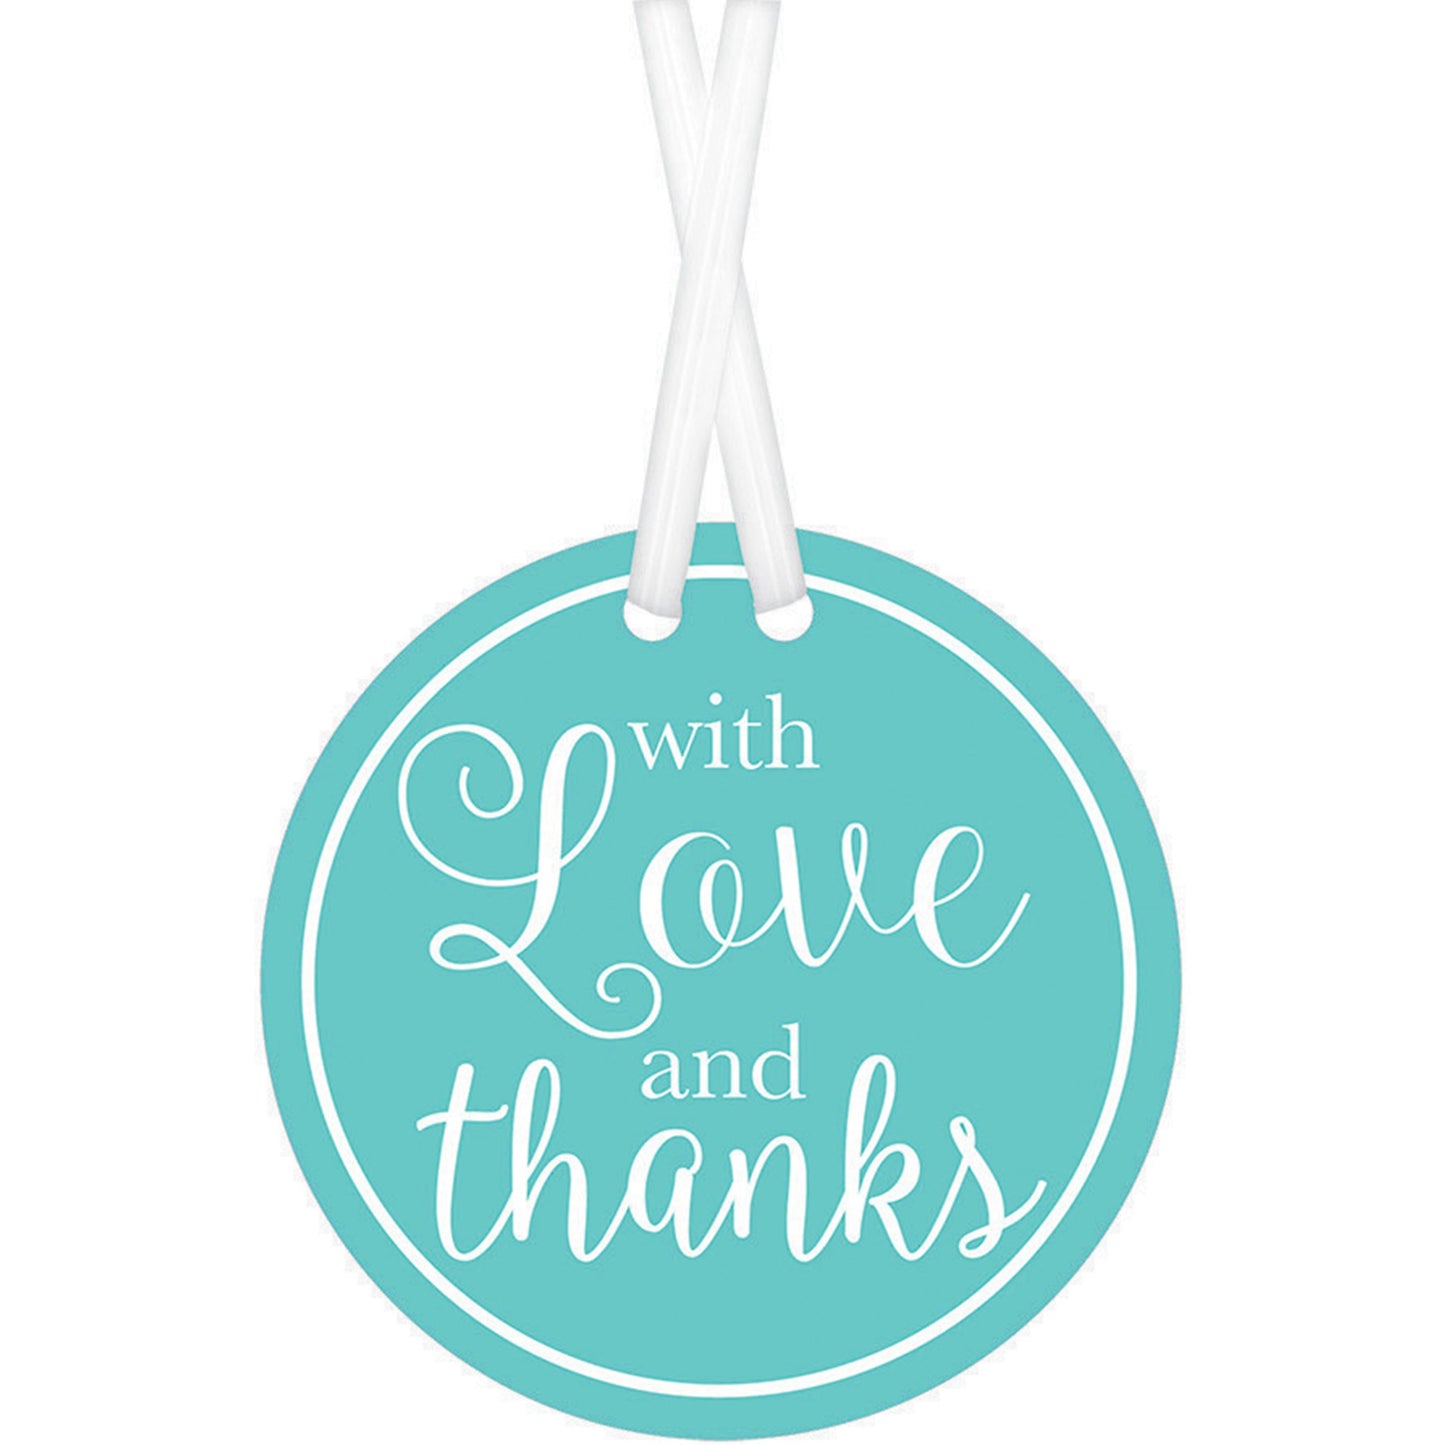 With Love & Thanks Tags - Robin's Egg Blue